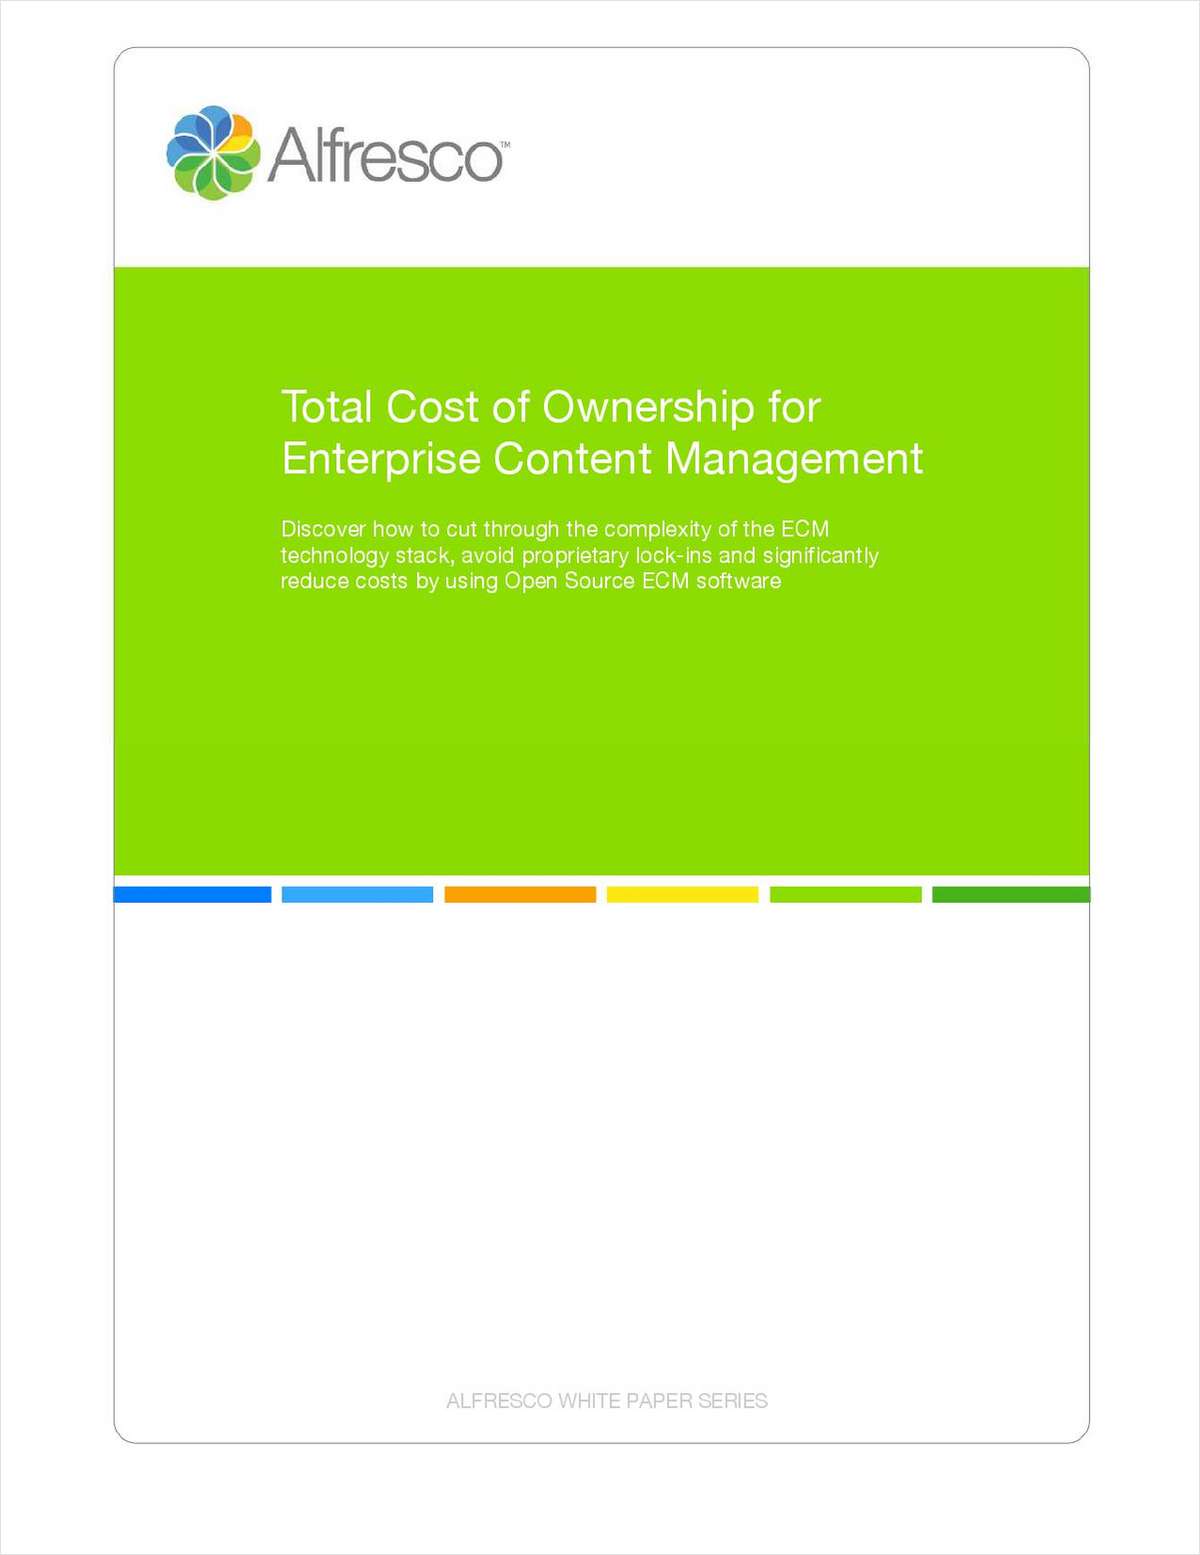 Total Cost of Ownership for Enterprise Content Management